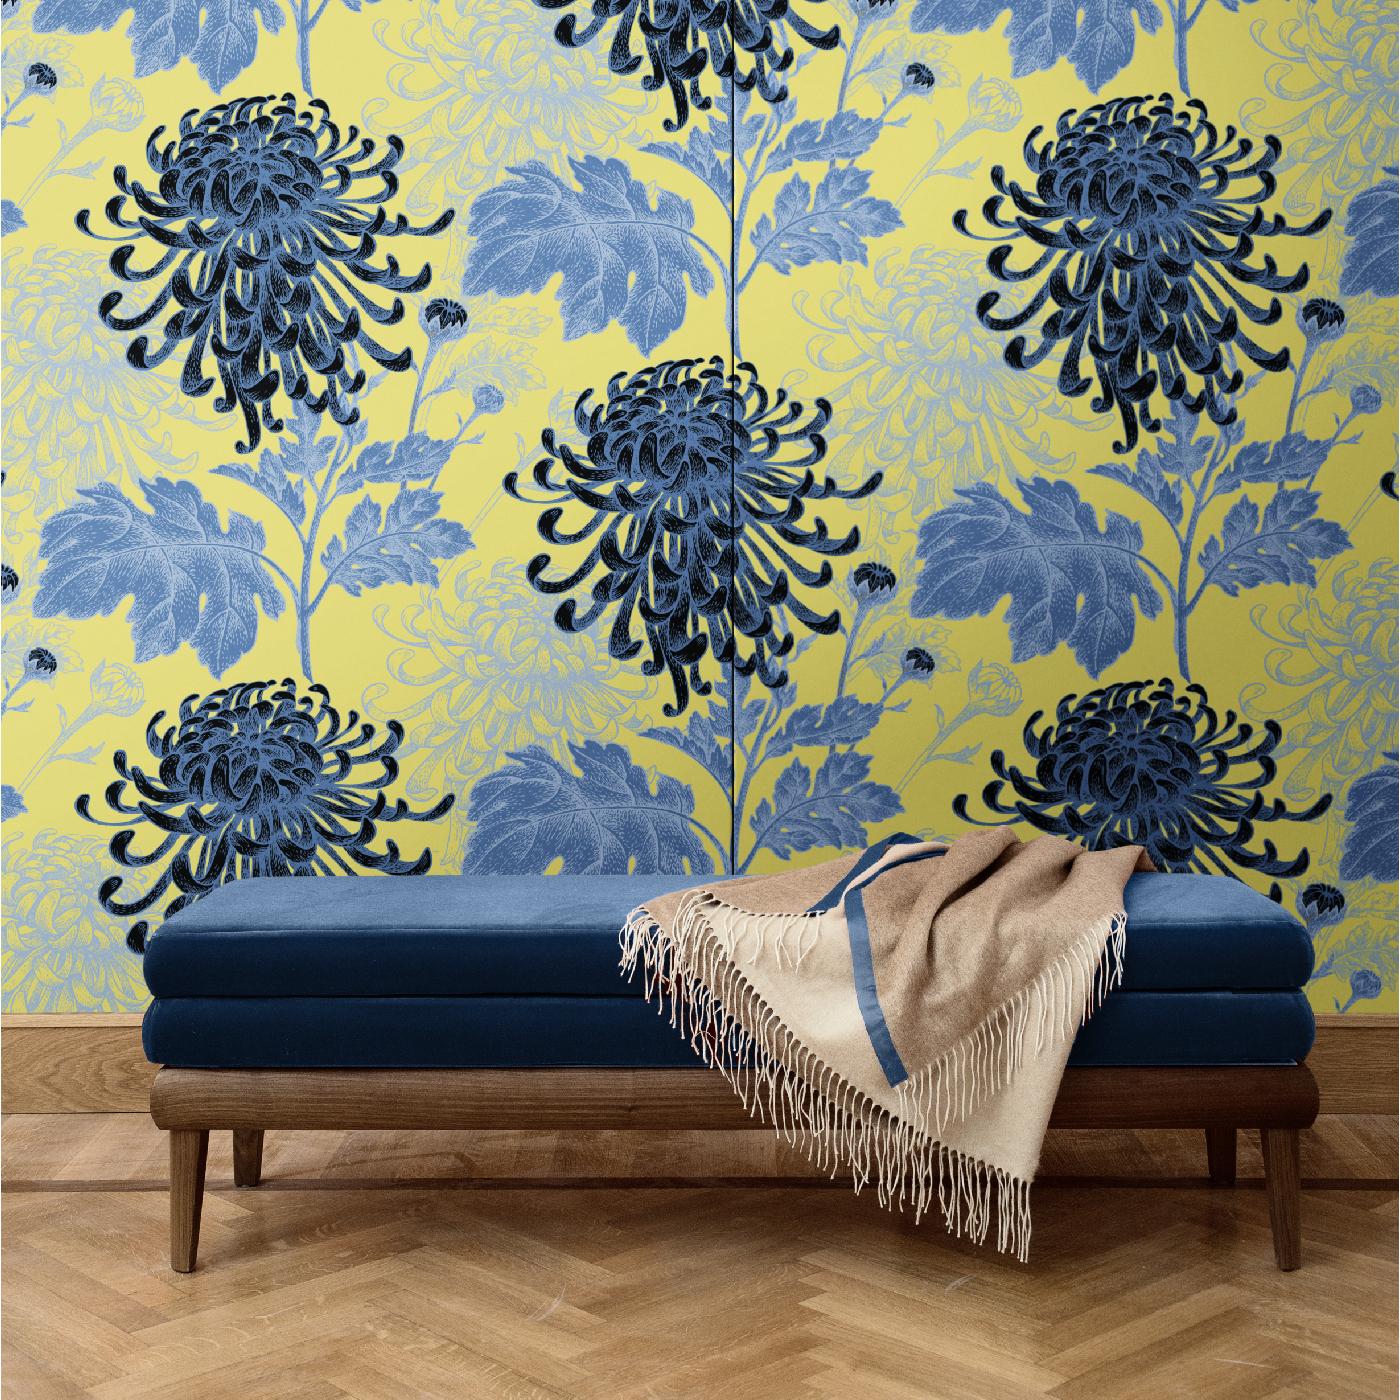 A mesmerizing juxtaposition of elegant dahlias depicted in blue tones over a mustard-yellow background, this elegant wall covering will make a statement in any home. It was crafted of silk and cotton and comes in two different versions: as boiserie